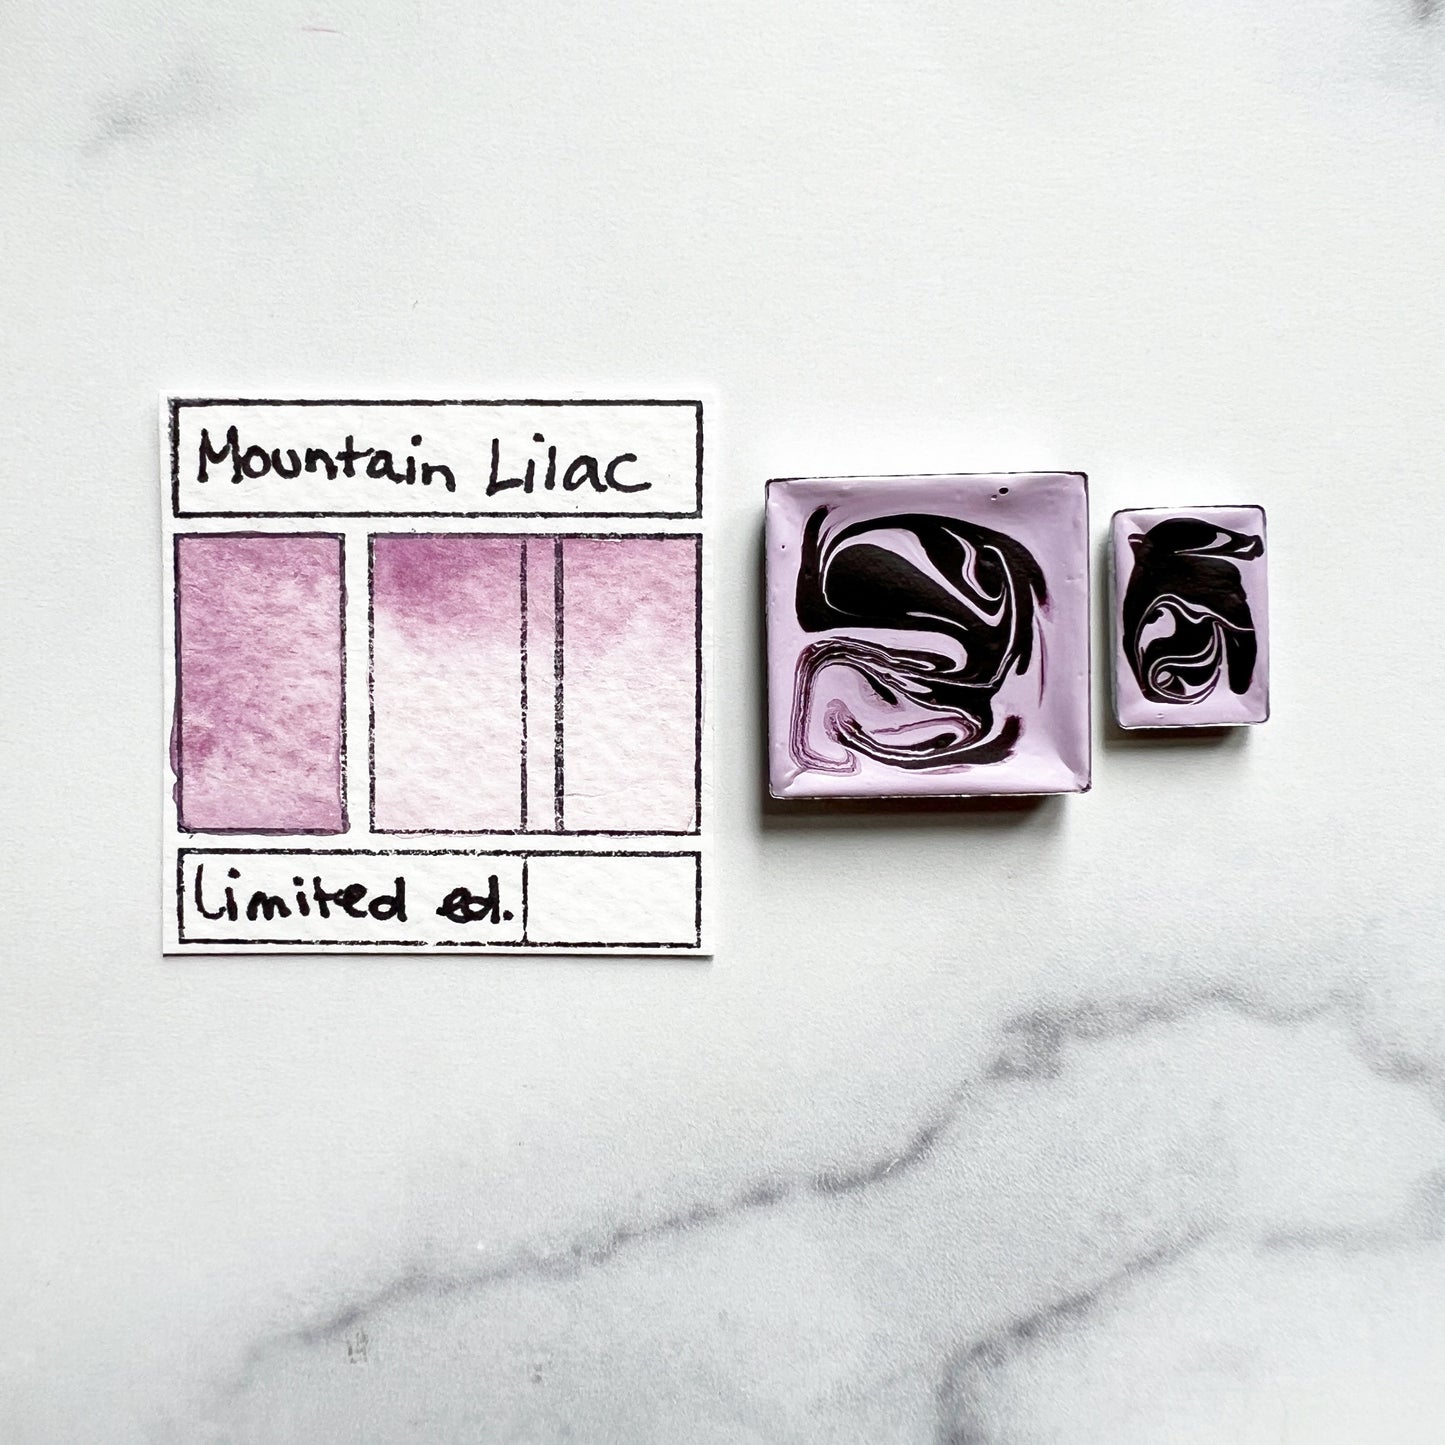 RM Mountain Lilac. Half pan or bottle cap of handmade watercolor paint